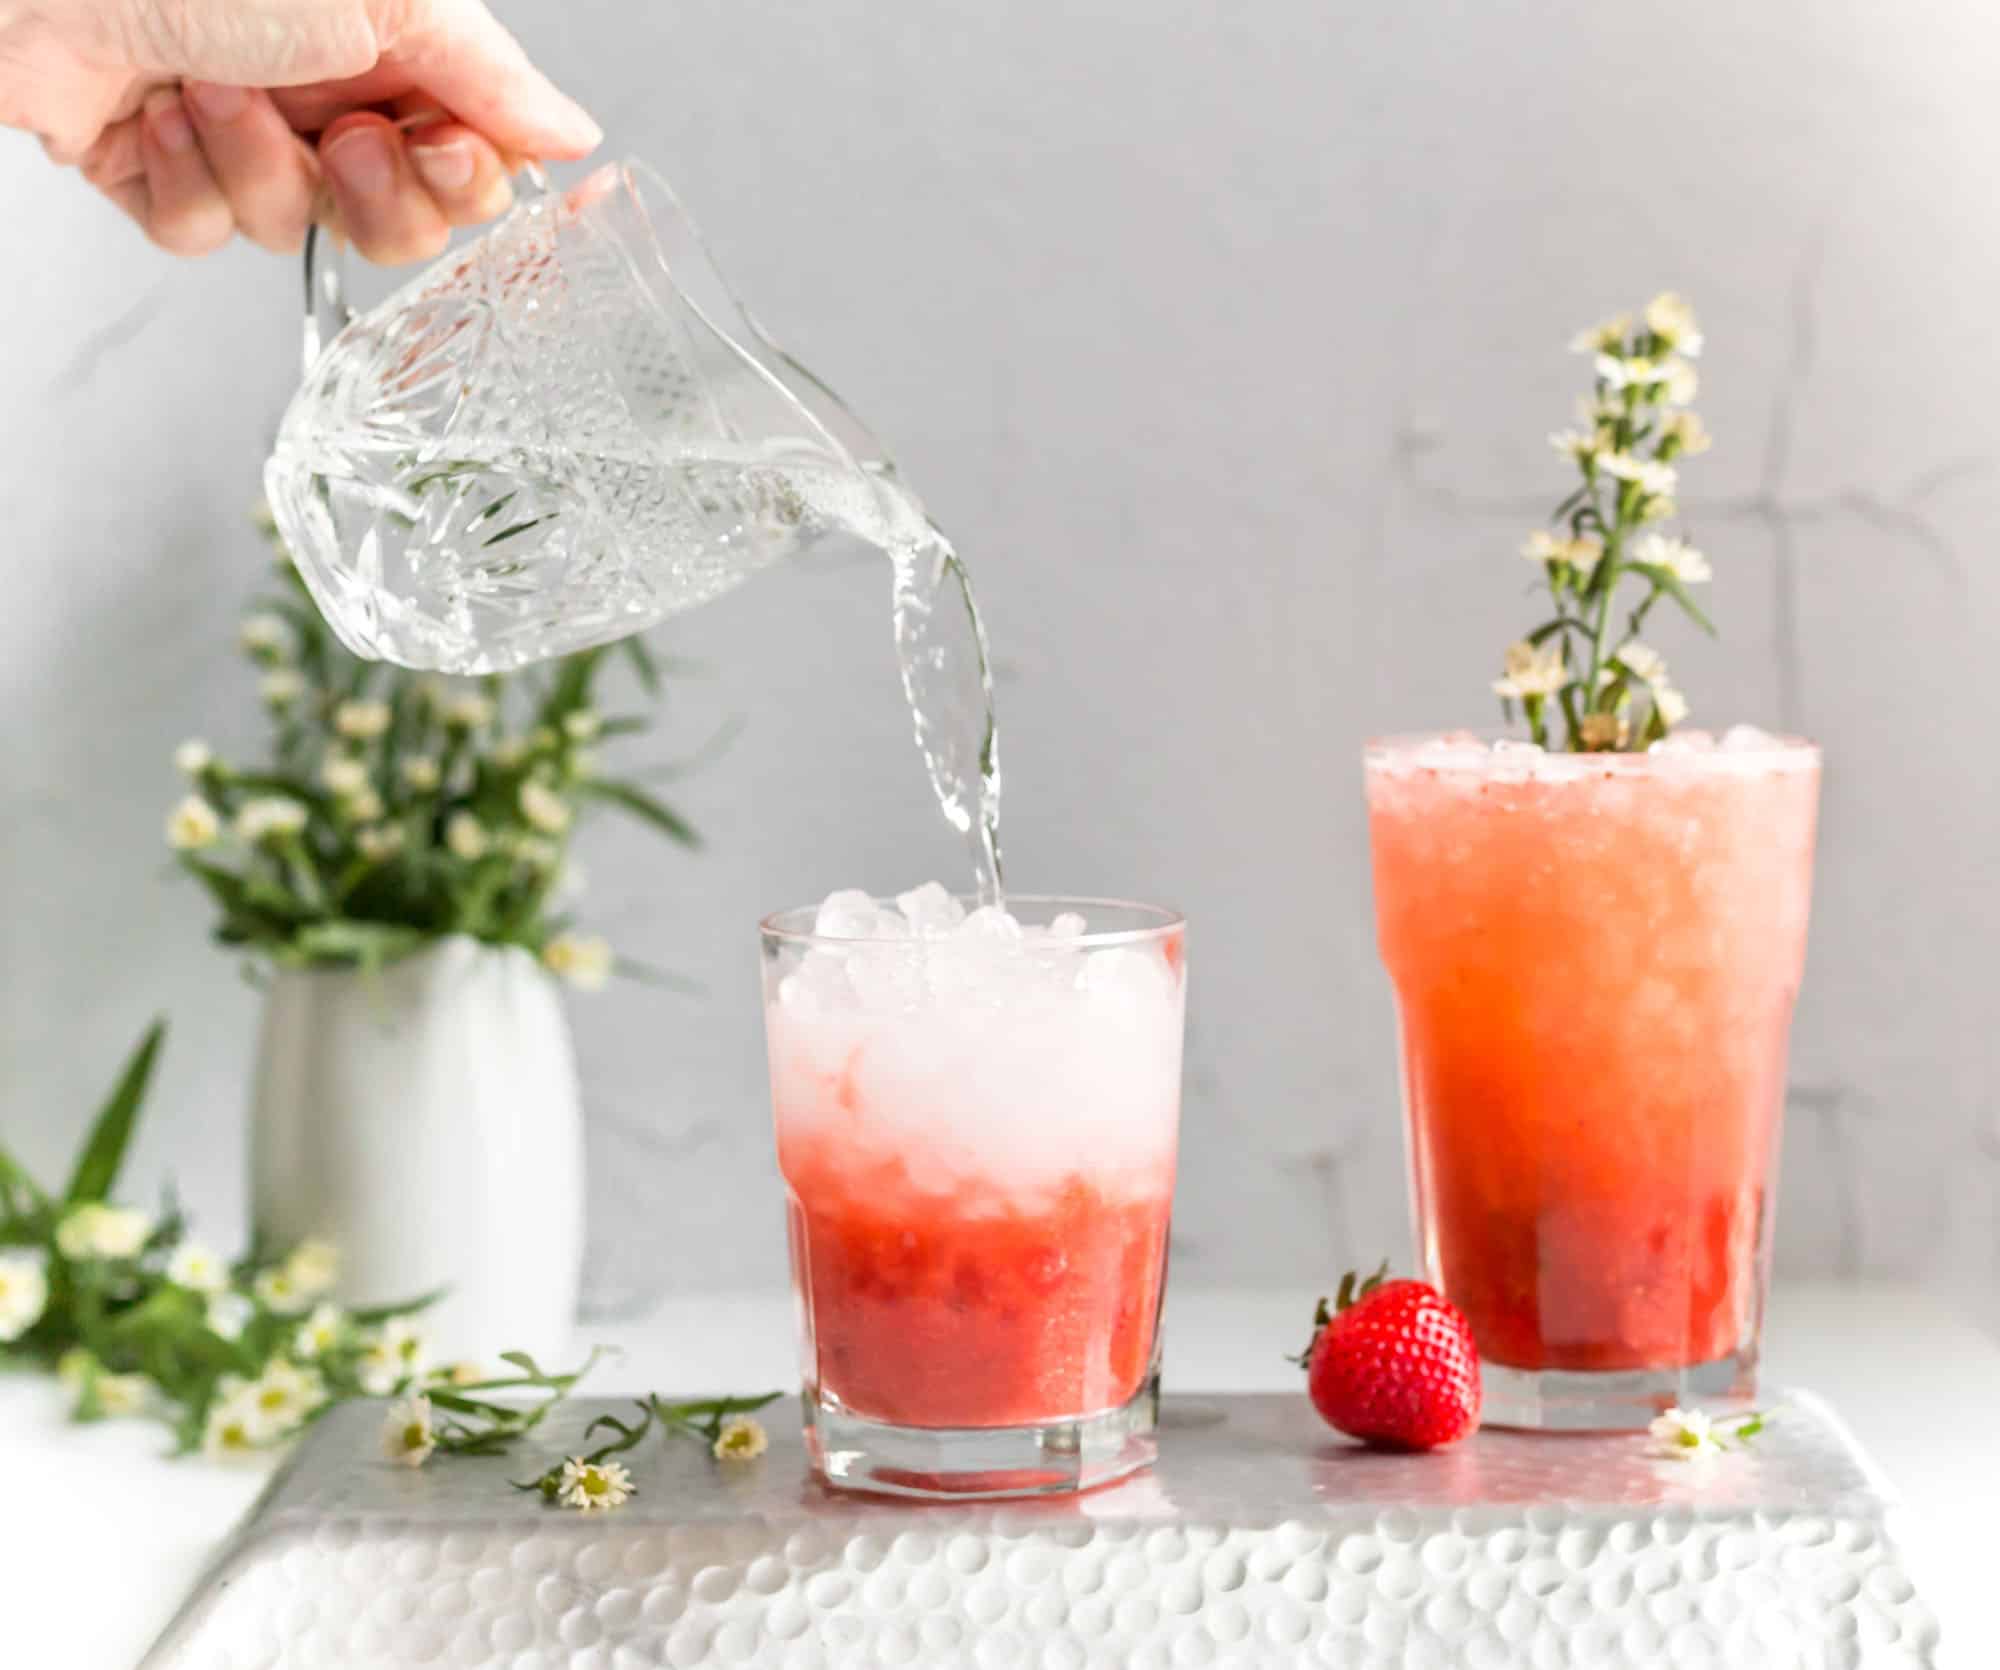 Serving The Perfect Summer Drink With Strawberries and Peaches and Fizzy Water